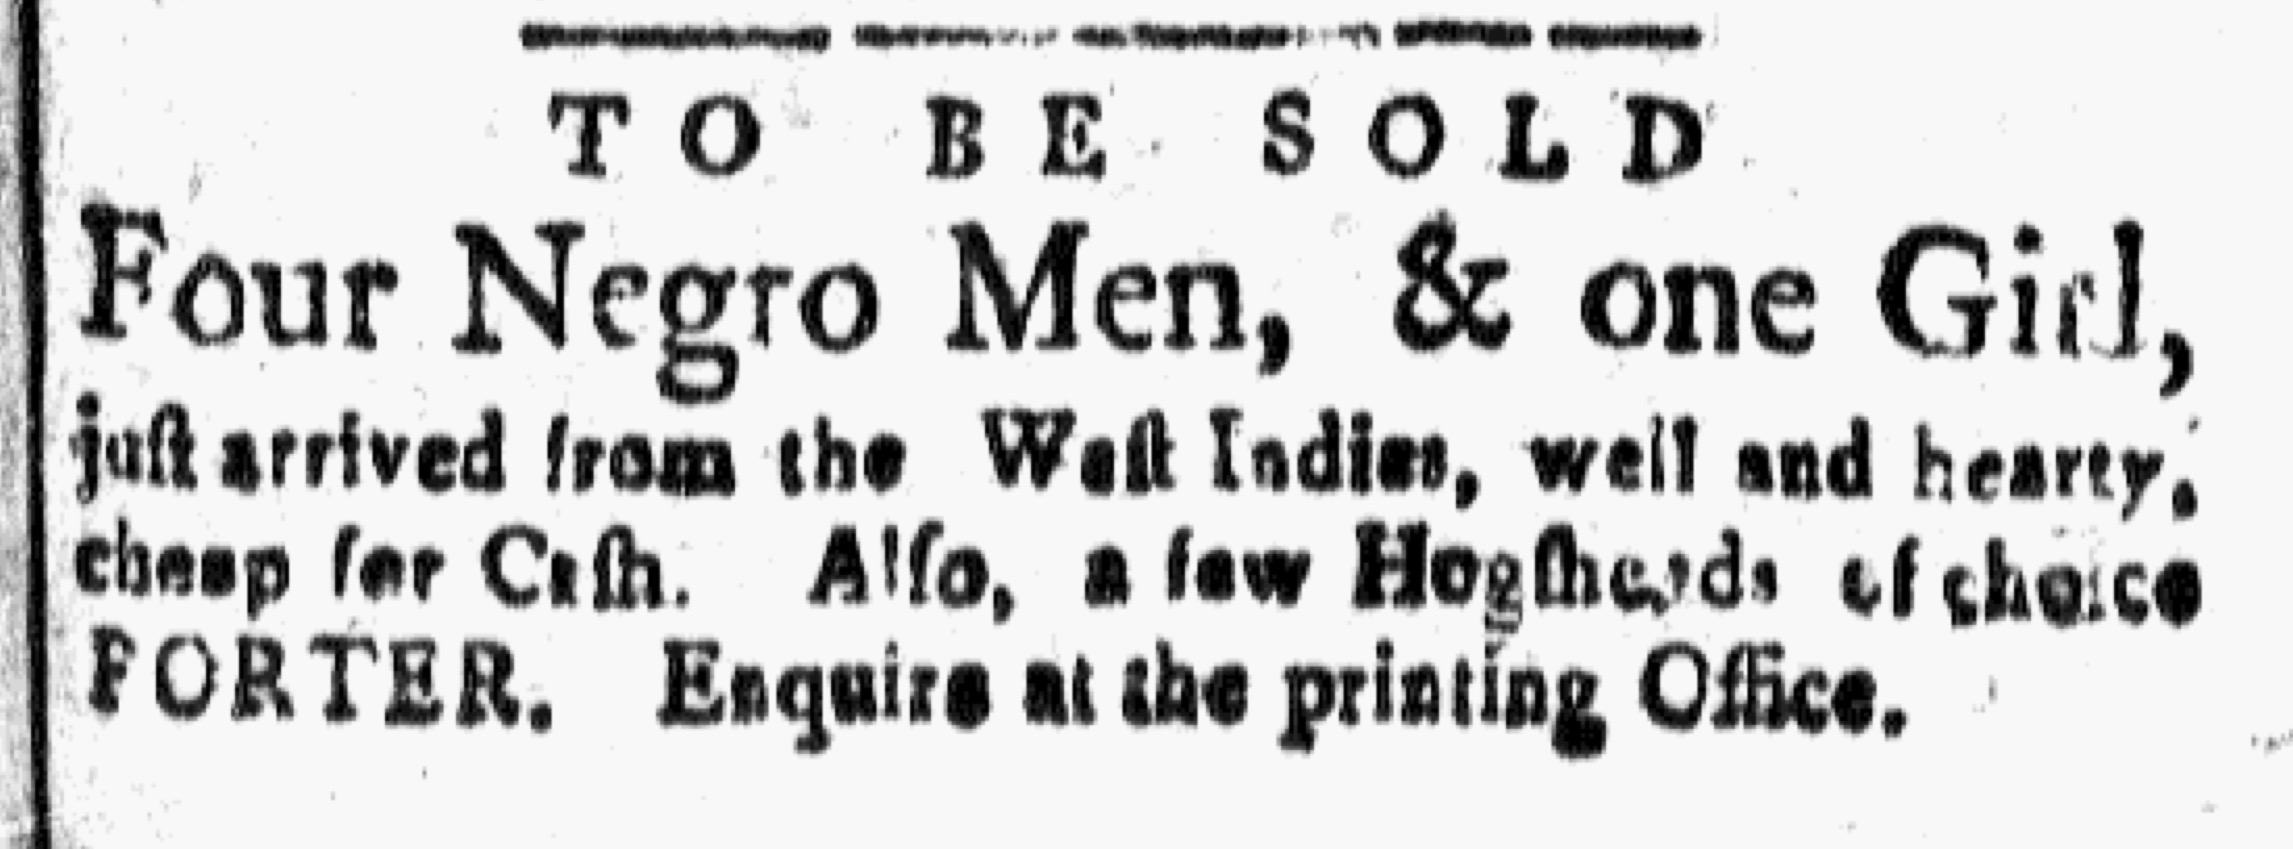 Slavery Advertisements Published September 4 1772 The Adverts 250